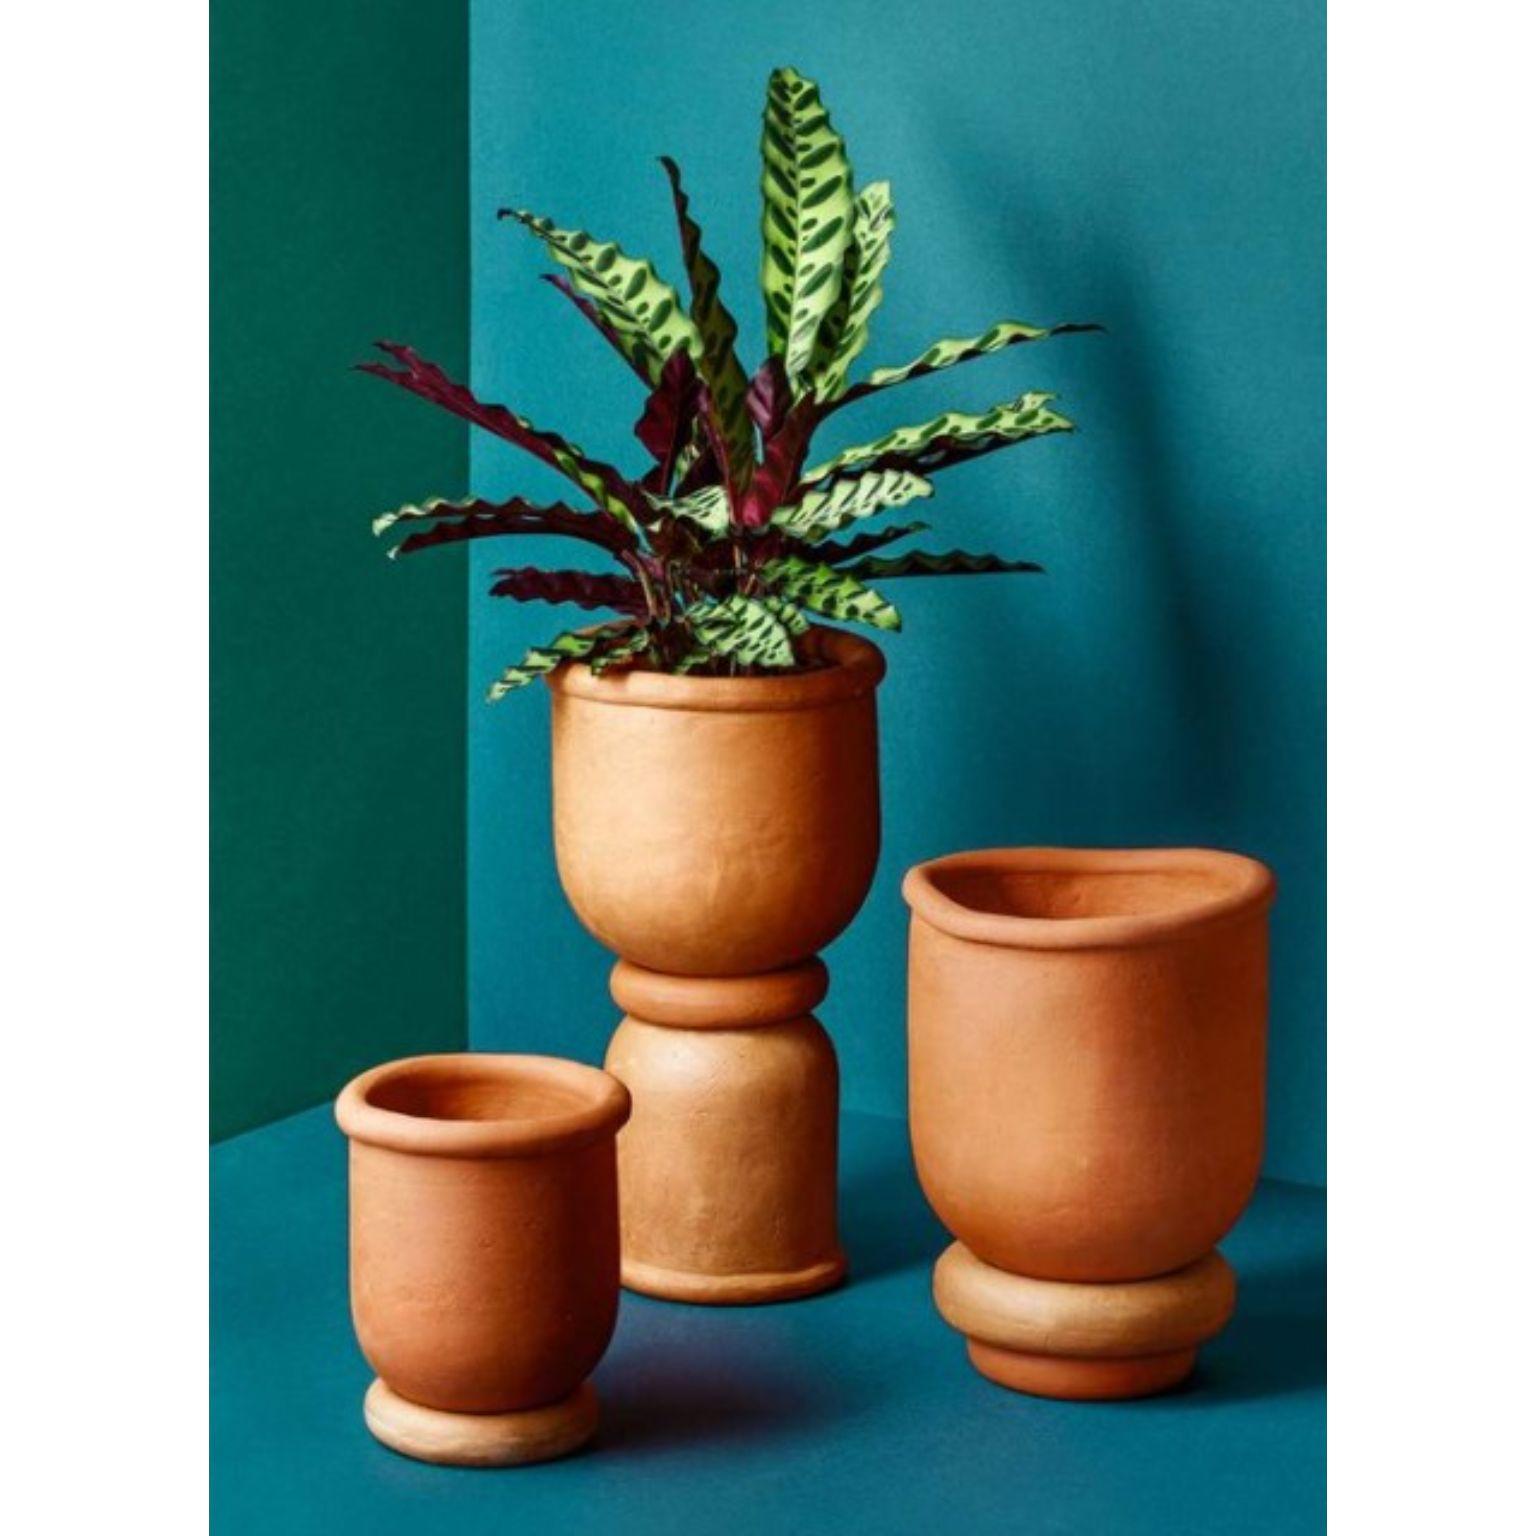 Set of 3 Mix & Match Vases by Tero Kuitunen
Material: Handbuild terracotta.
Dimensions: D22 x H40 cm, D25 x H25, D17 x H22
Also available : Two different size that can be compiled in many ways.

Handbuild terracotta planters. Open